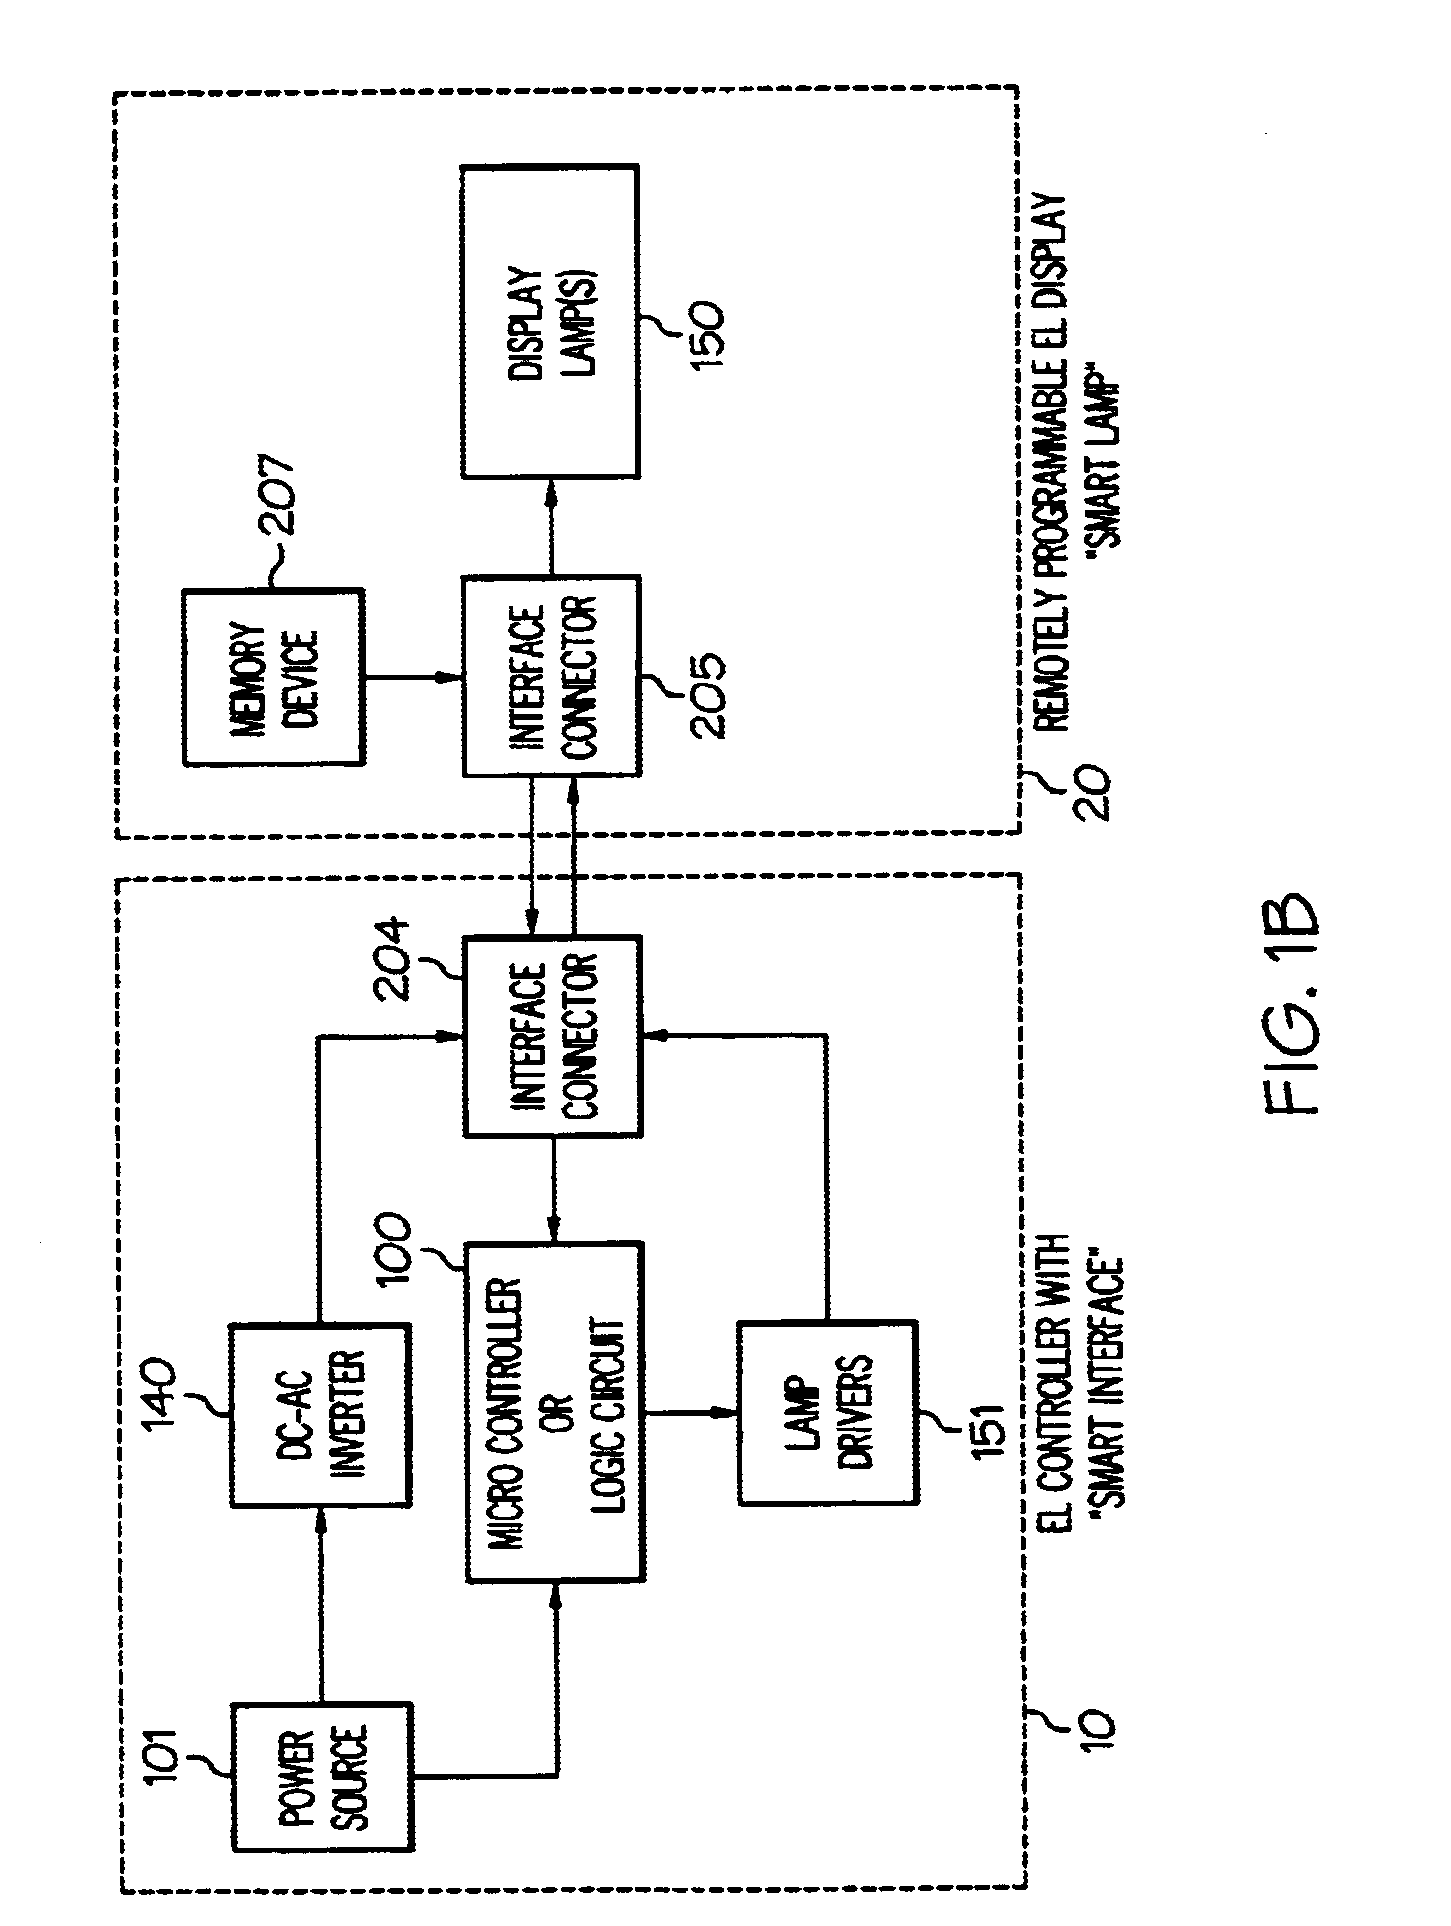 Remotely programmable control device for use in electroluminescent display and lighting applications